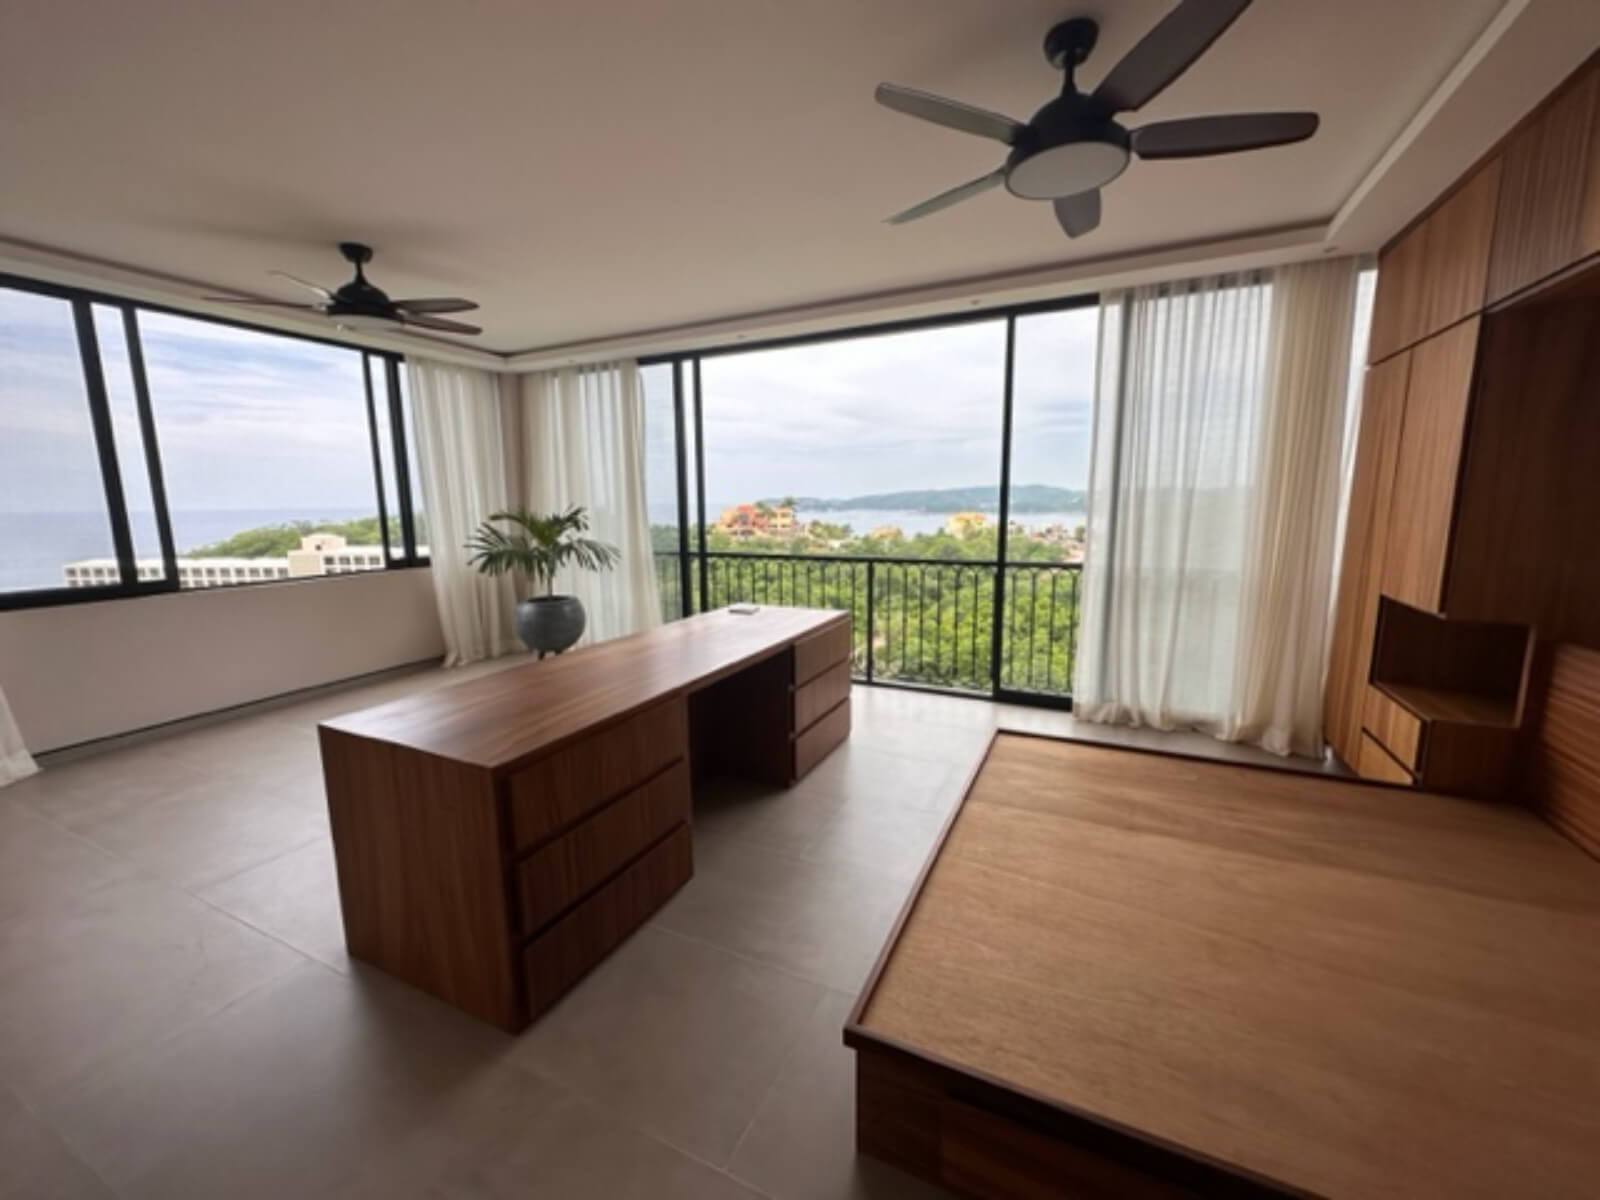 Condo with terrace and pool in pre-construction, fifth avenue, sale, Huatulco